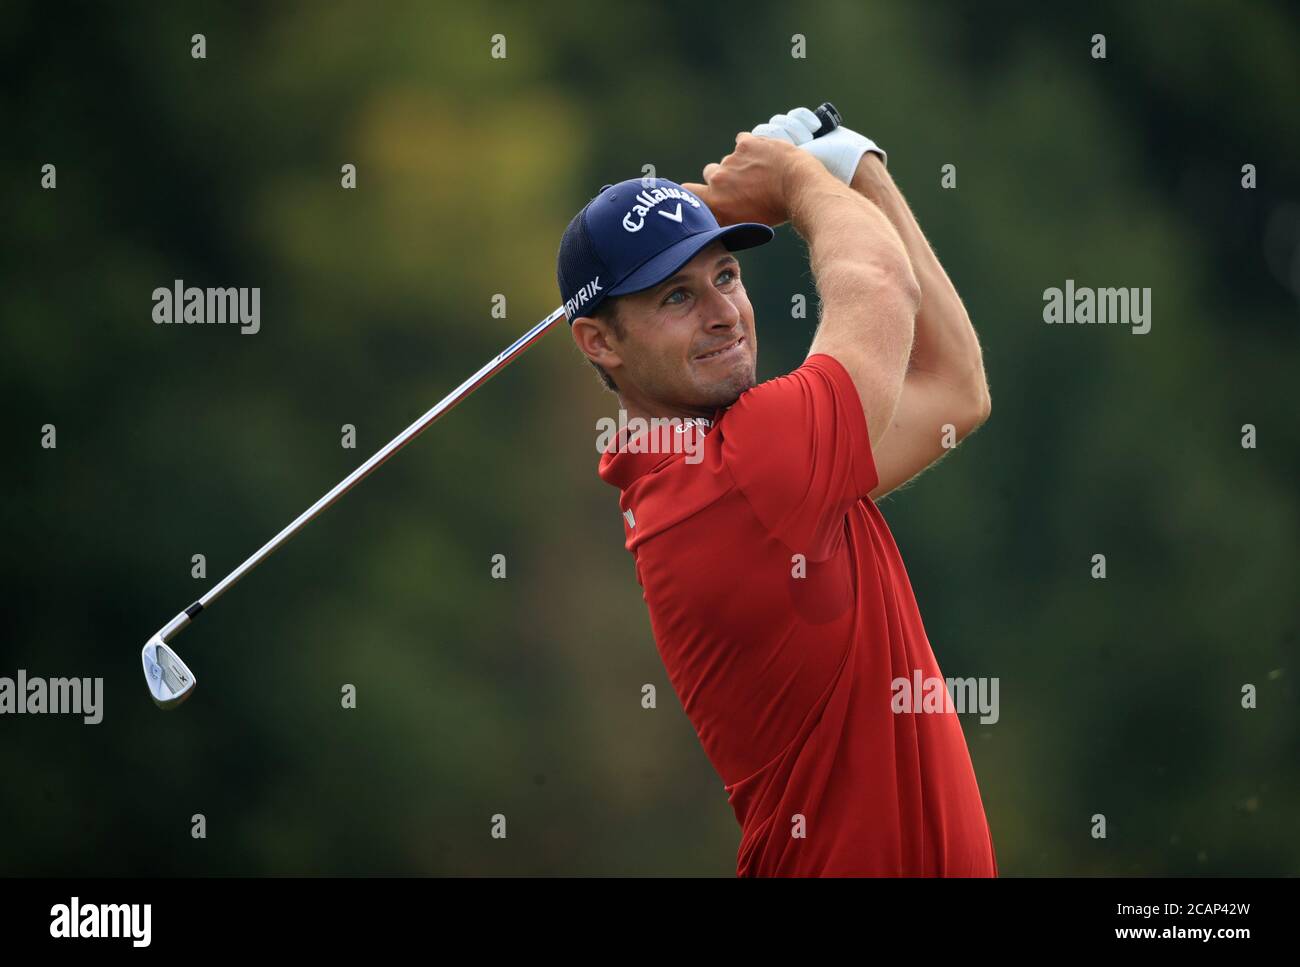 Italy's Andrea Pavan during day three of the English Championship at Hanbury Manor Marriott Hotel and Country Club, Hertfordshire. Saturday August 8, 2020. See PA story GOLF Ware. Photo credit should read: Adam Davy/PA Wire. RESTRICTIONS: Editorial Use, No Commercial Use. Stock Photo